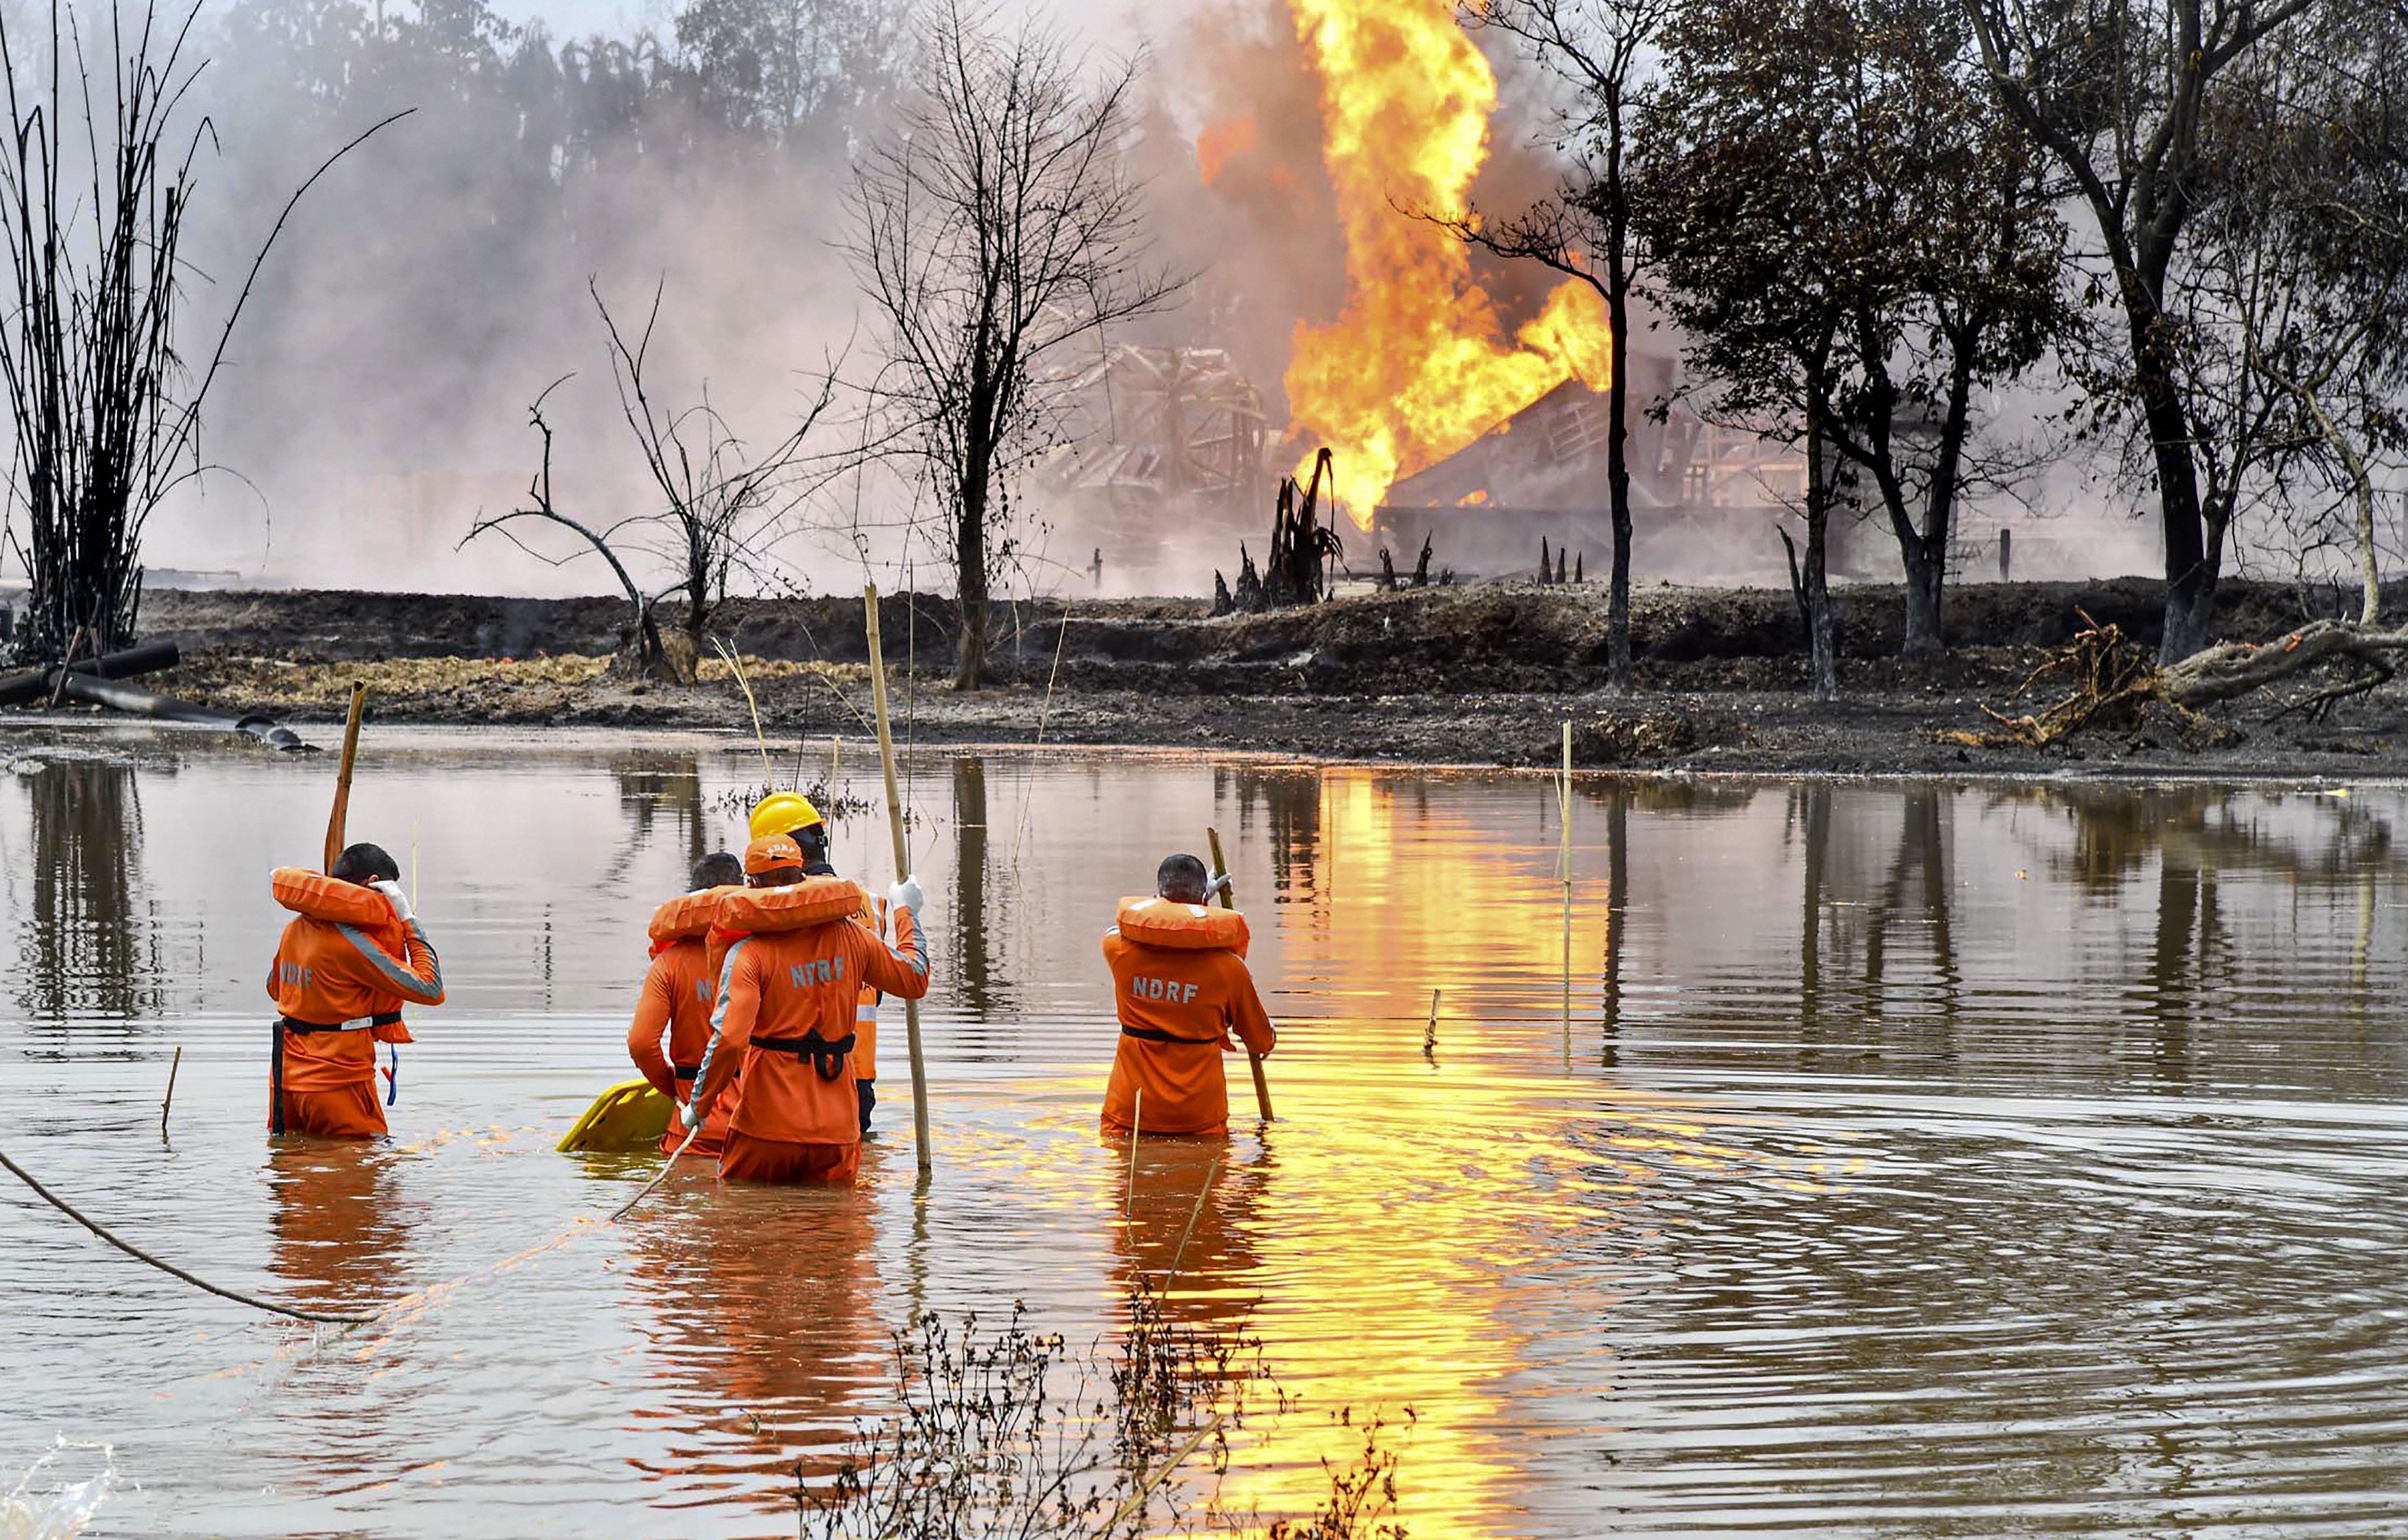 National Disaster Response Team (NDRF) personnel carry out search and rescue operations after two firemen of Oil India Limited went missing since an oil well at the company’s Baghjan oilfield exploded, in Assam’s Tinsukia district, Wednesday, June 10, 2020. The firemen were found dead by the team. 